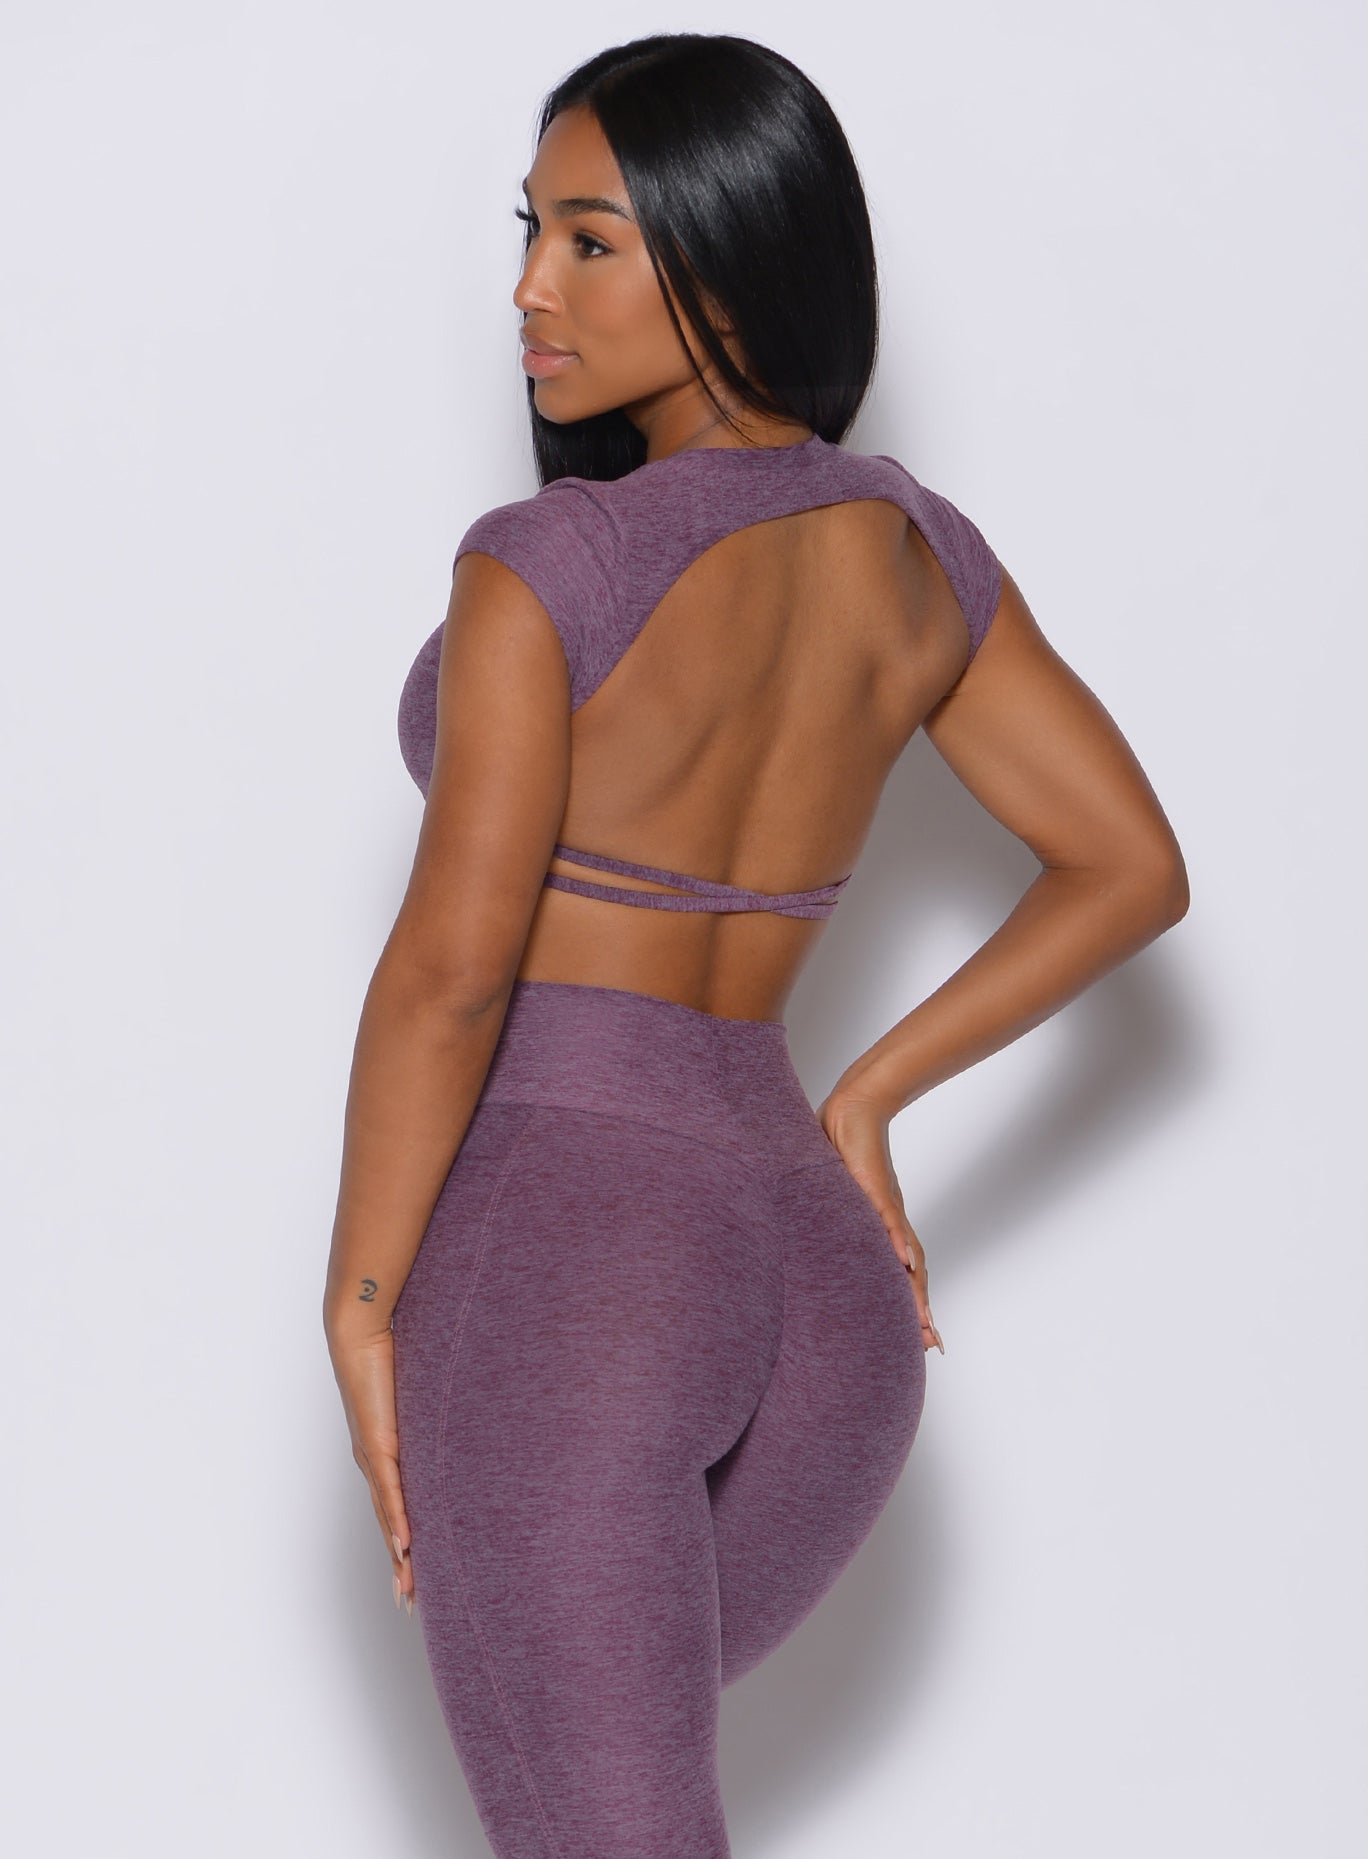 Back profile view of a model facing to her left wearing our open back tee in Regal Purple color and a matching leggings